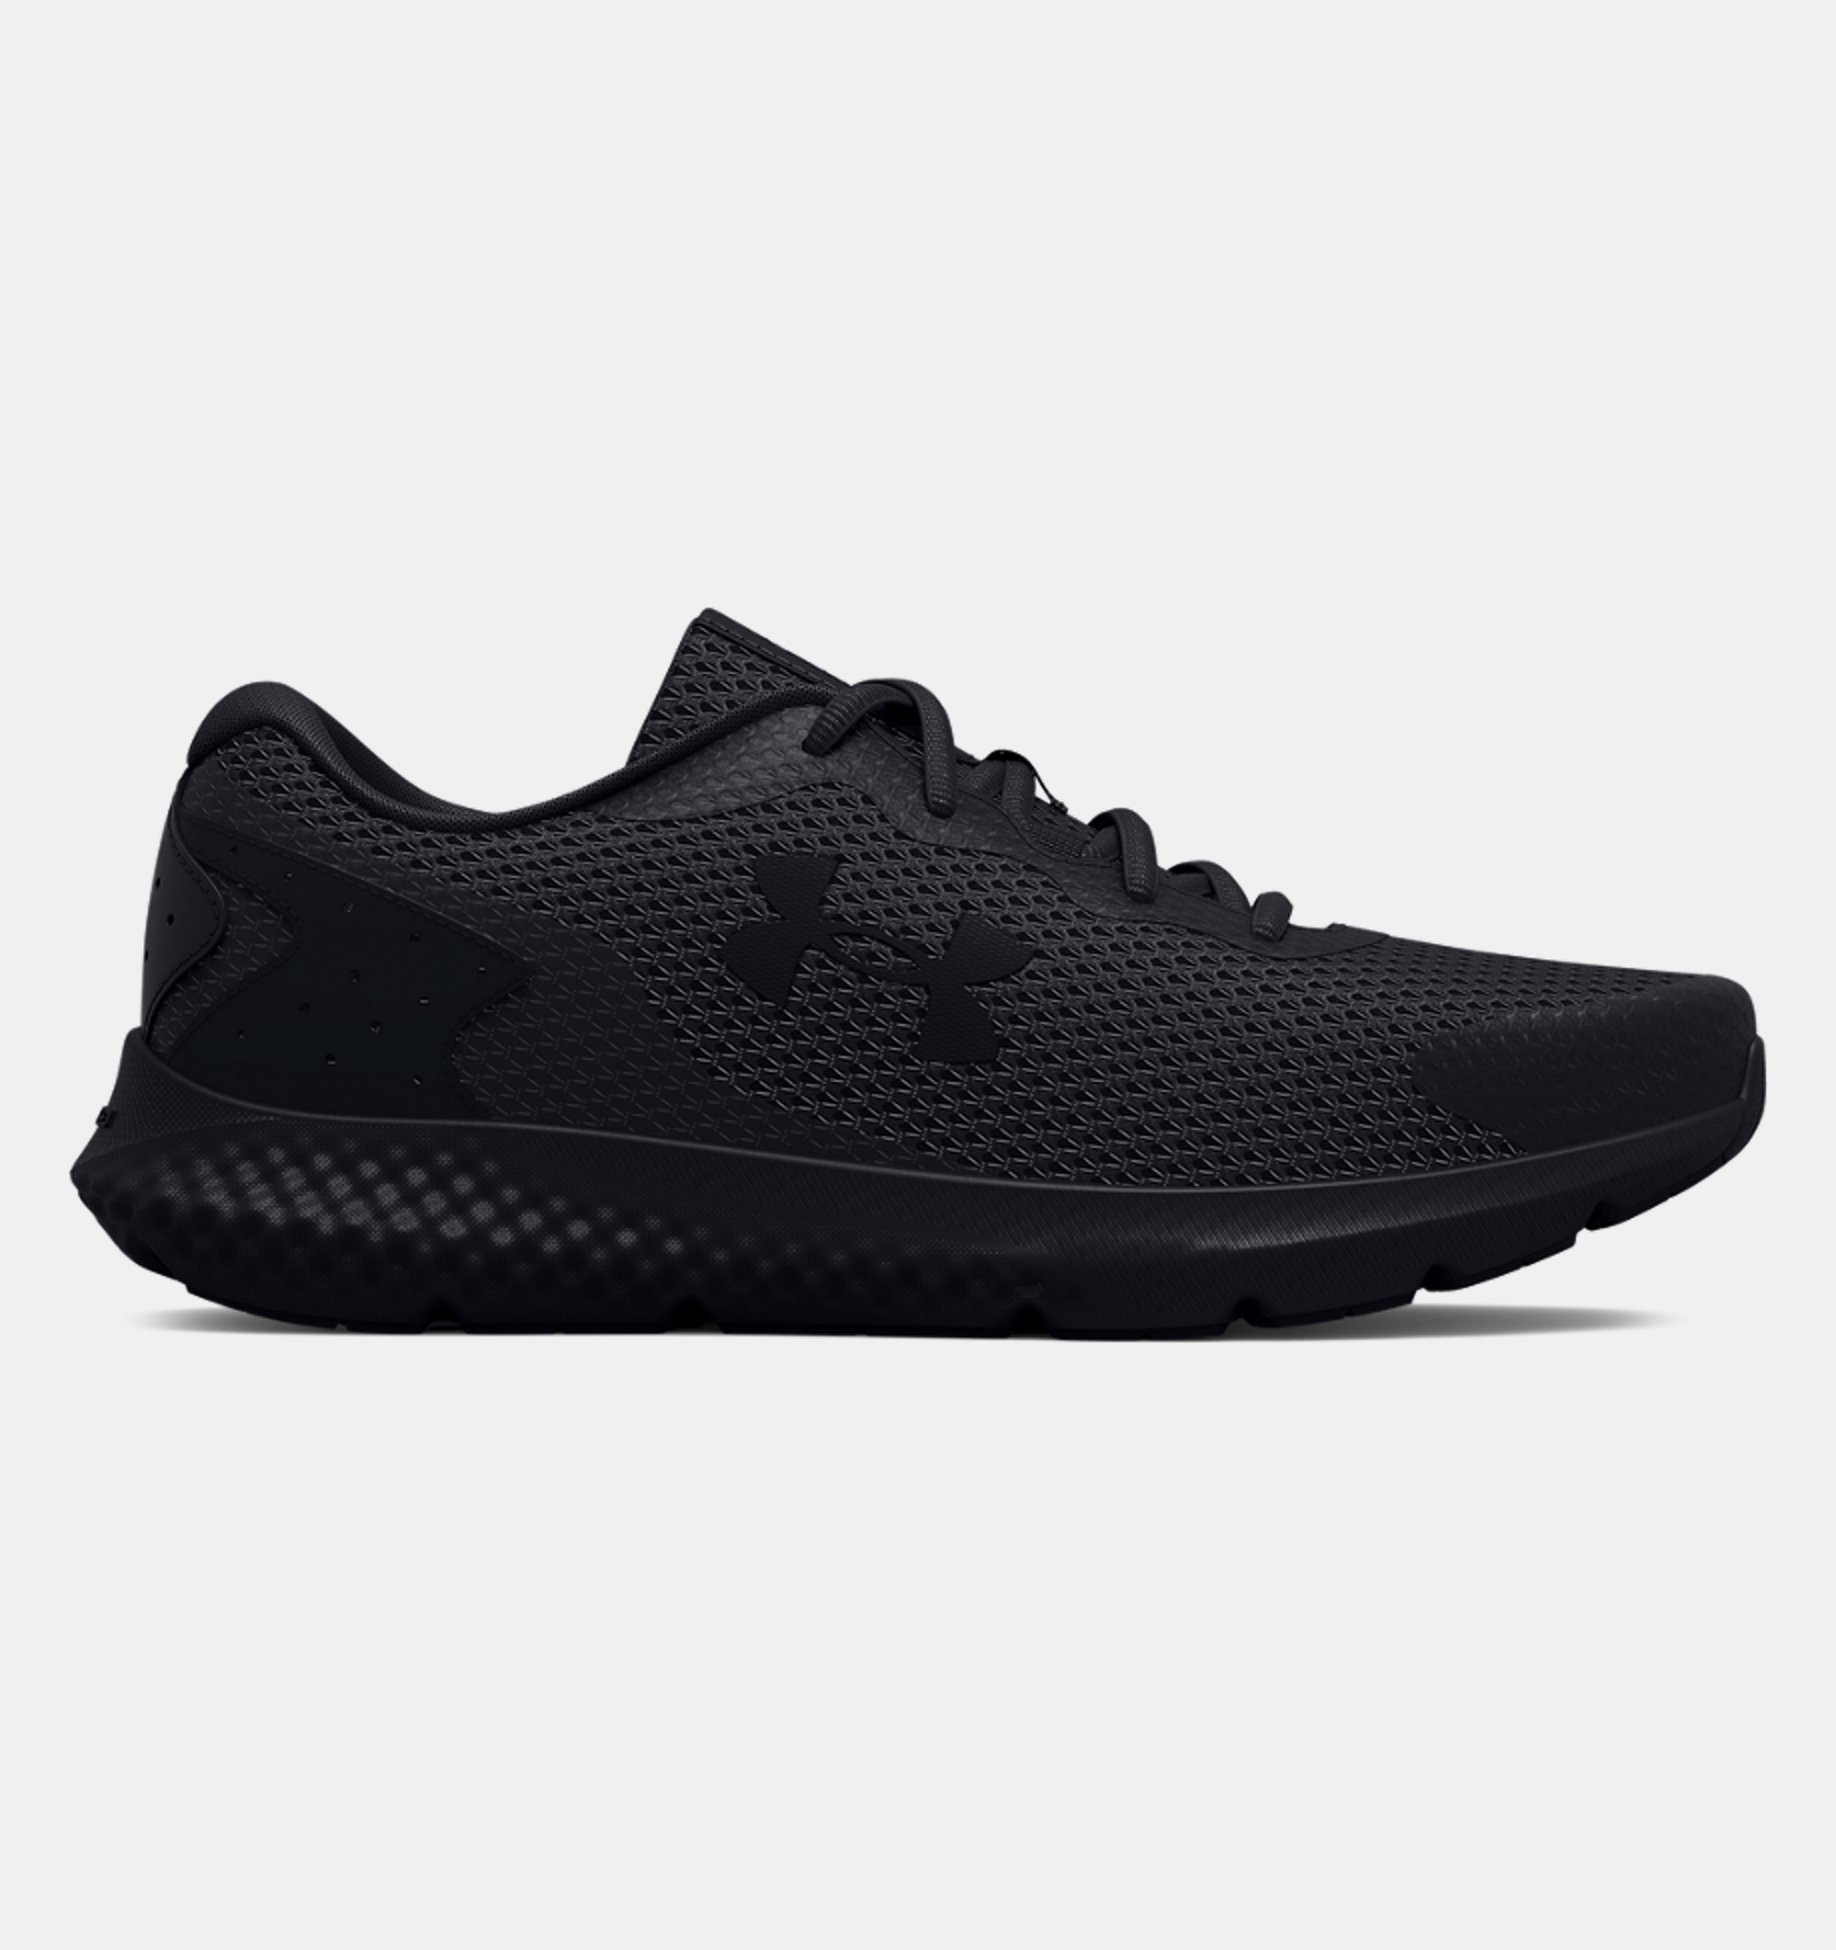 Zapatillas de running Under Armour Charged Rogue 3 para mujer